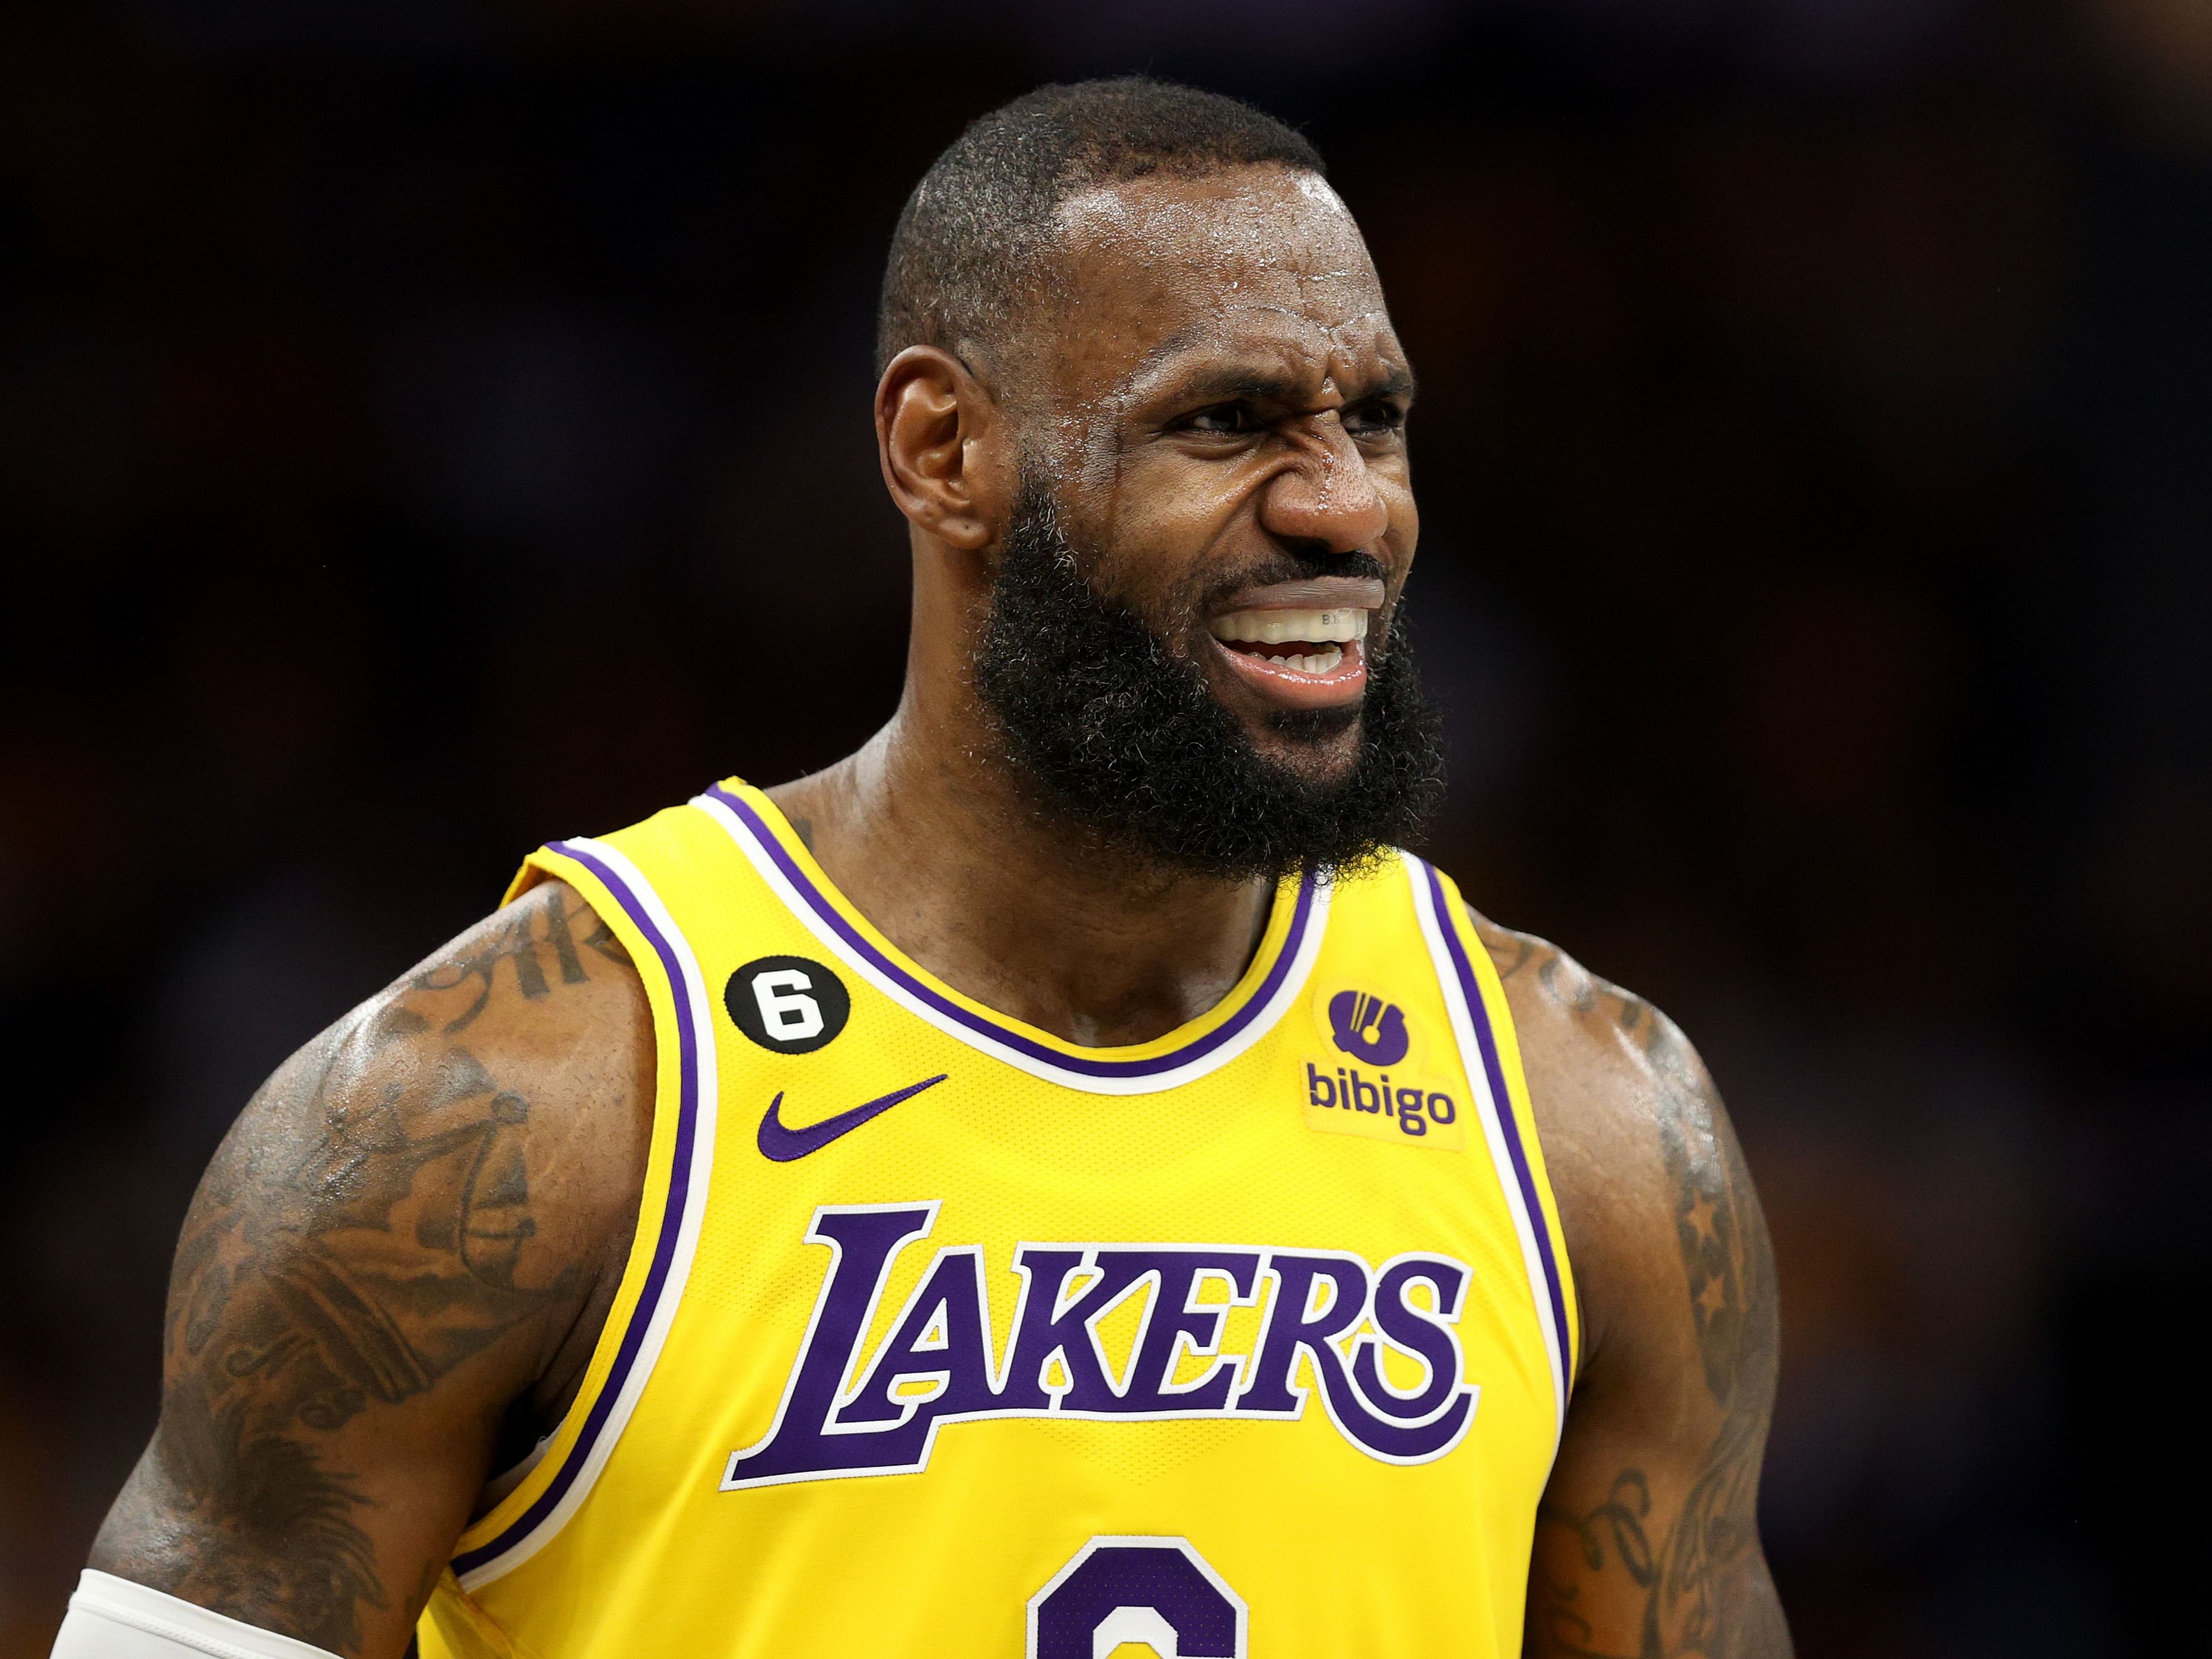 Stephen A. Smith throws shade at LeBron James&rsquo; legendary career